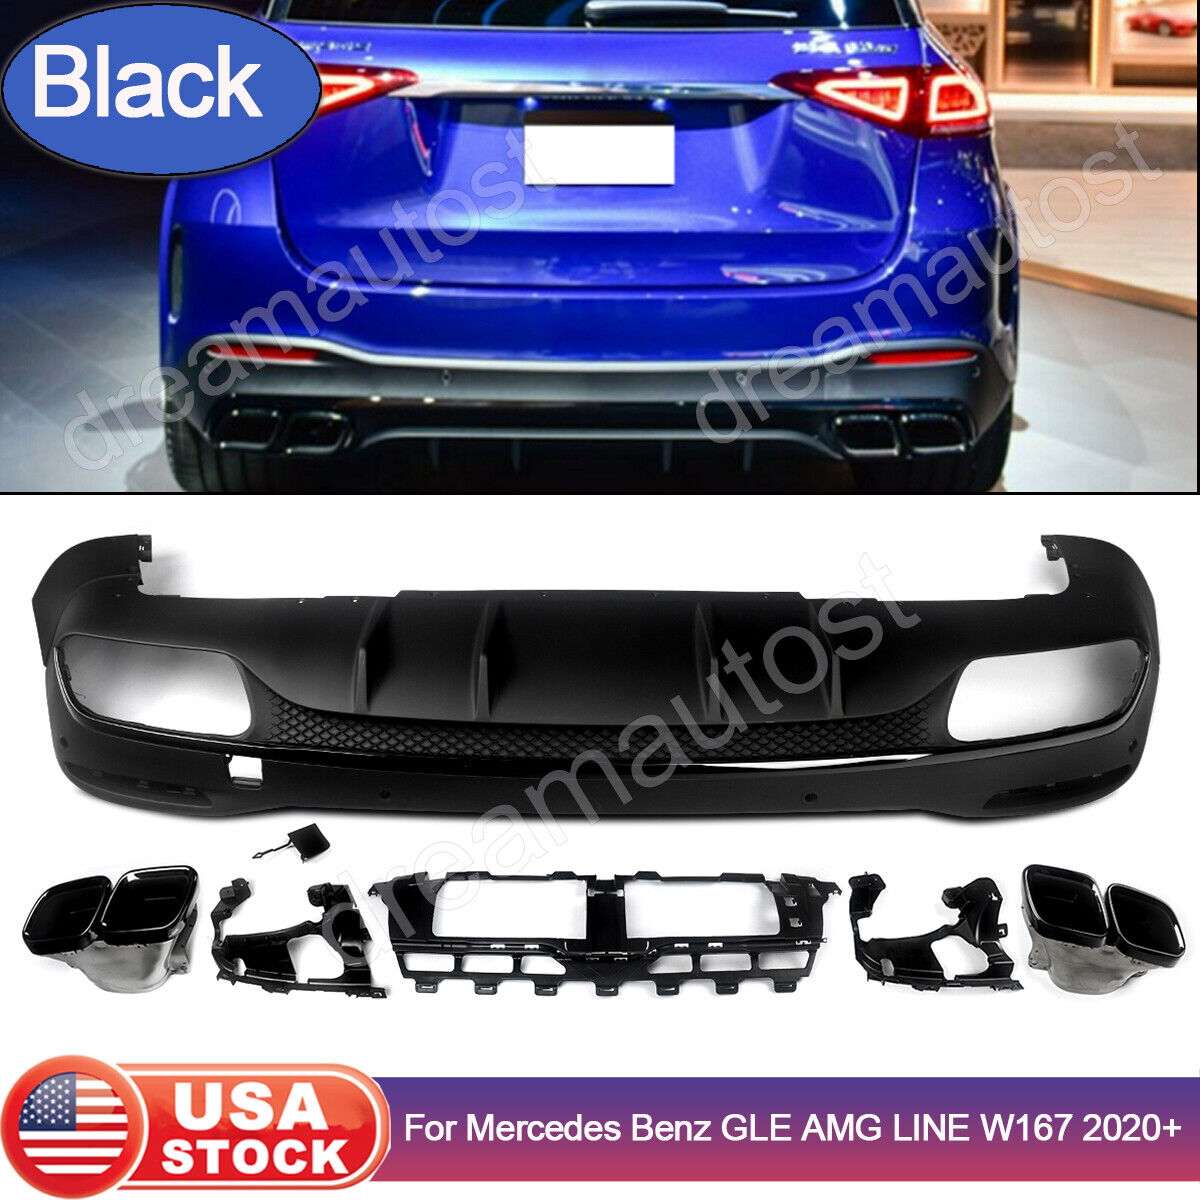 Black 63 AMG Look Rear Diffuser W/ Exhaust Tips for Mercedes Benz GLE W167 2020+